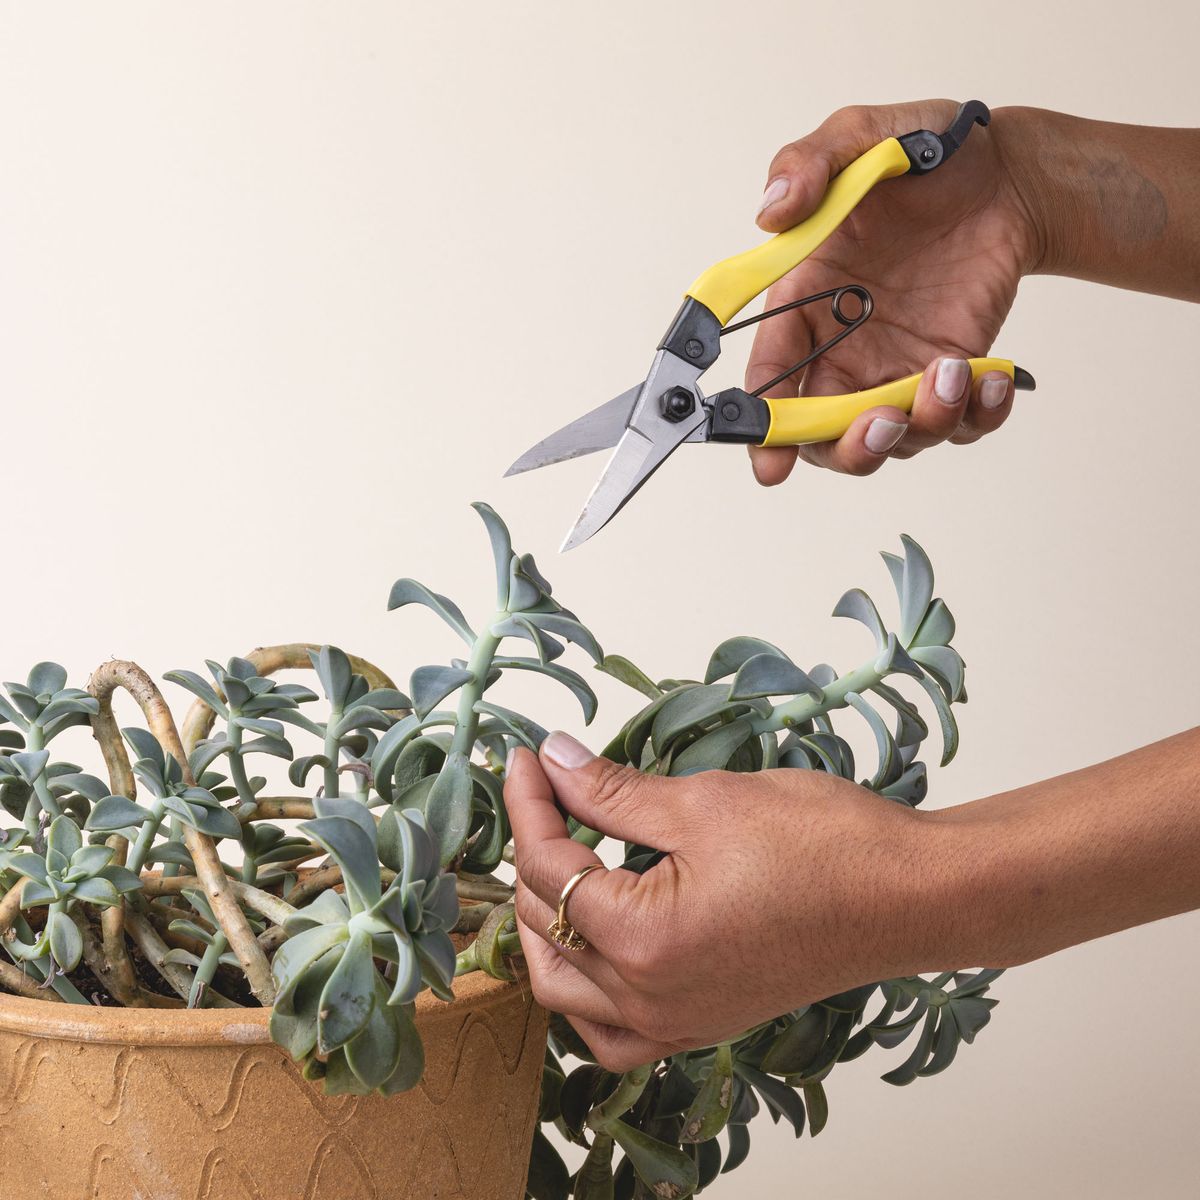 A hand is holding a pair of garden snips with a yellow handle and wide short blades next to a plant